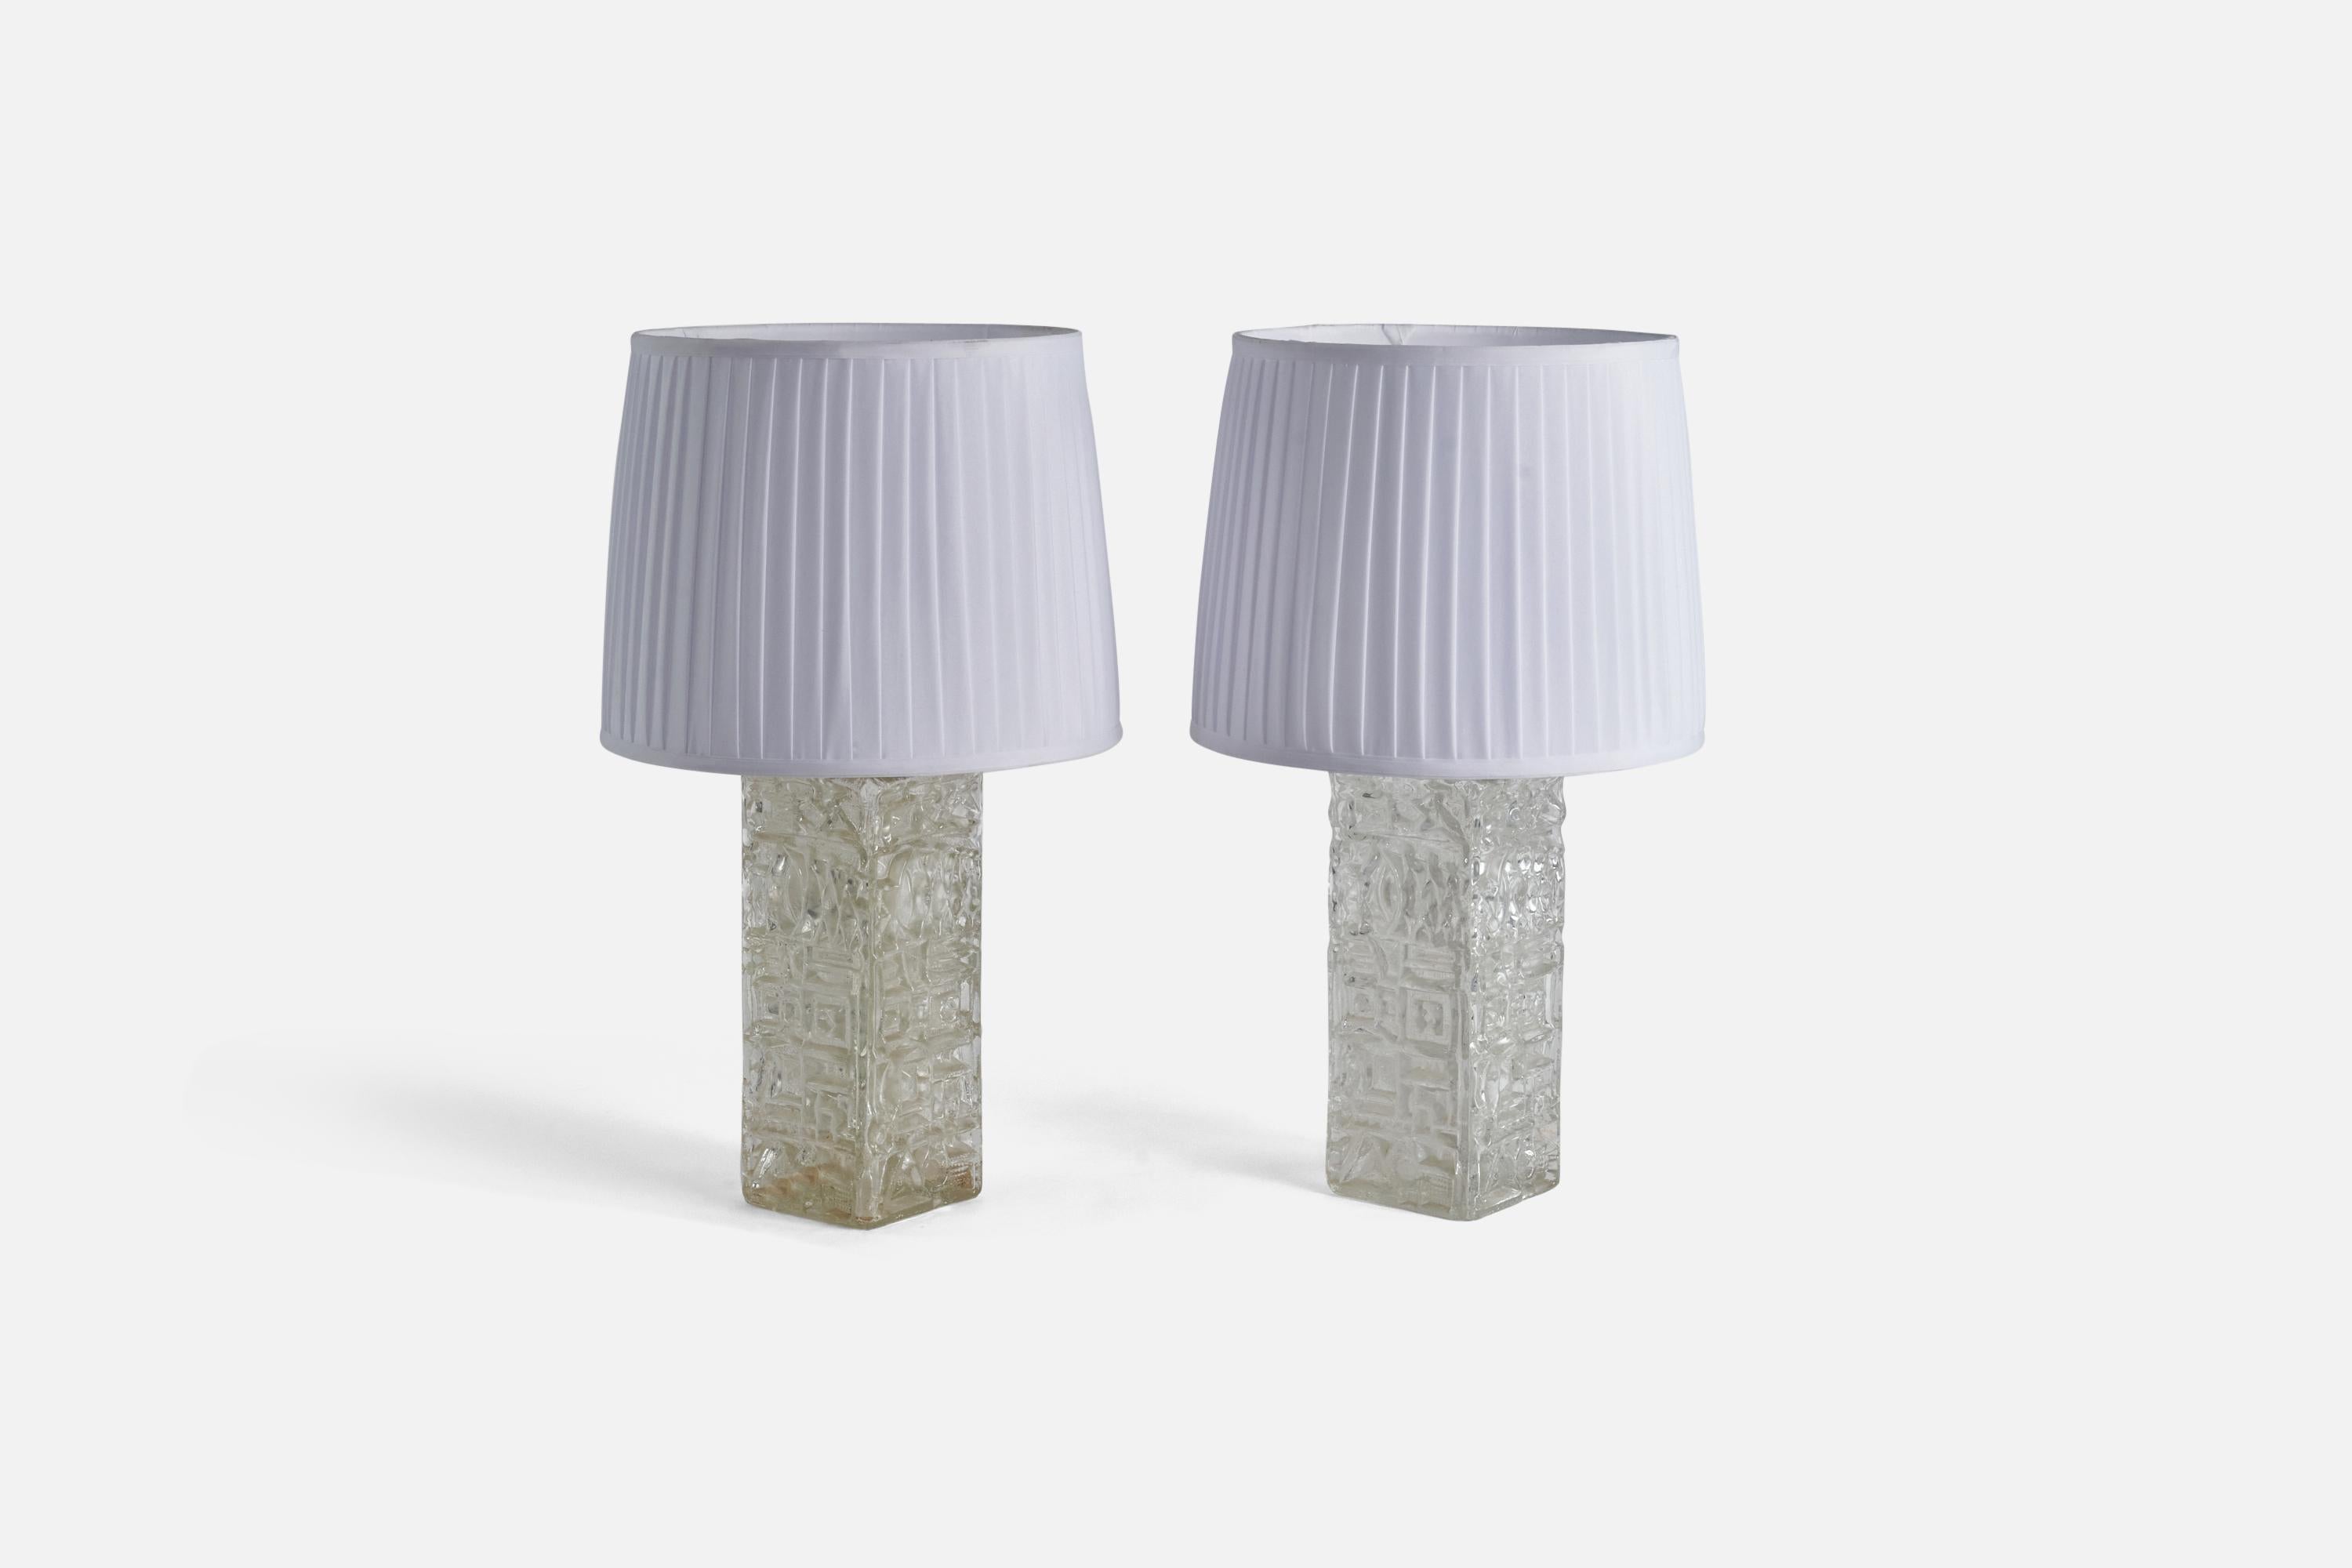 A pair of glass and white fabric table lamps designed and produced by AB Stilarmatur, Tranås, Sweden, 1960s. 

Sold with Lampshade(s).
Dimensions of Lamp (inches) : 16 x 4.62 x 4.62 (Height x Width x Depth)
Dimensions of Shade (inches) : 11.12 x 13